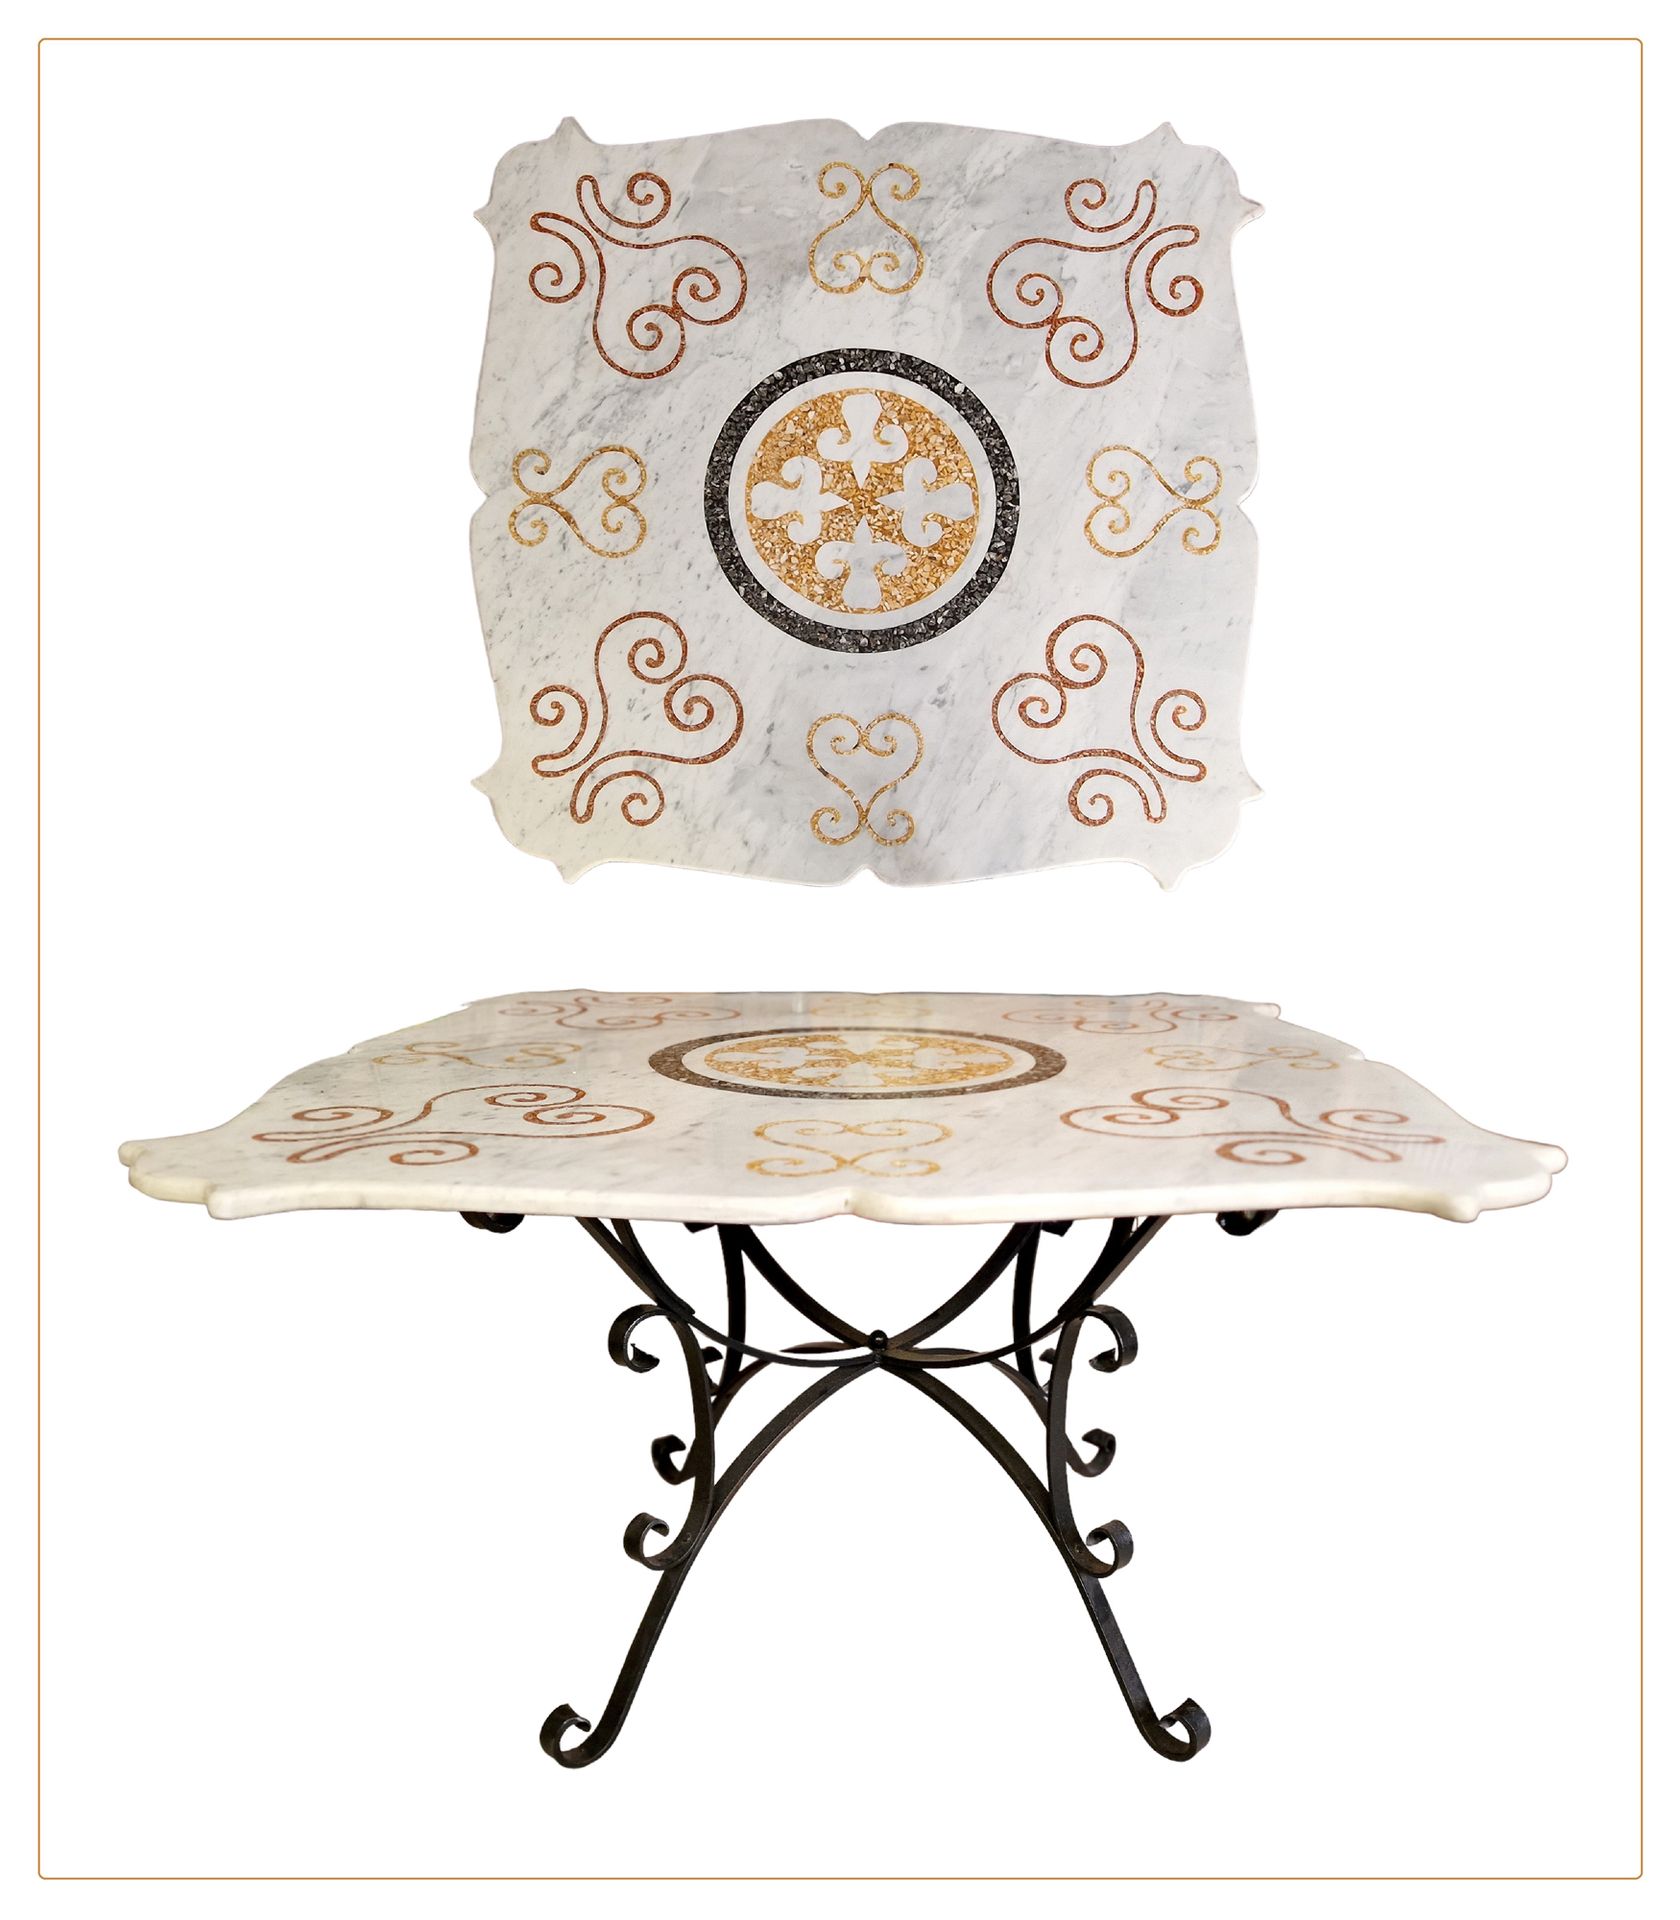 ELEGANTE TABLE DE TERASSE The marble top finely inlaid with a rose and interlaci&hellip;